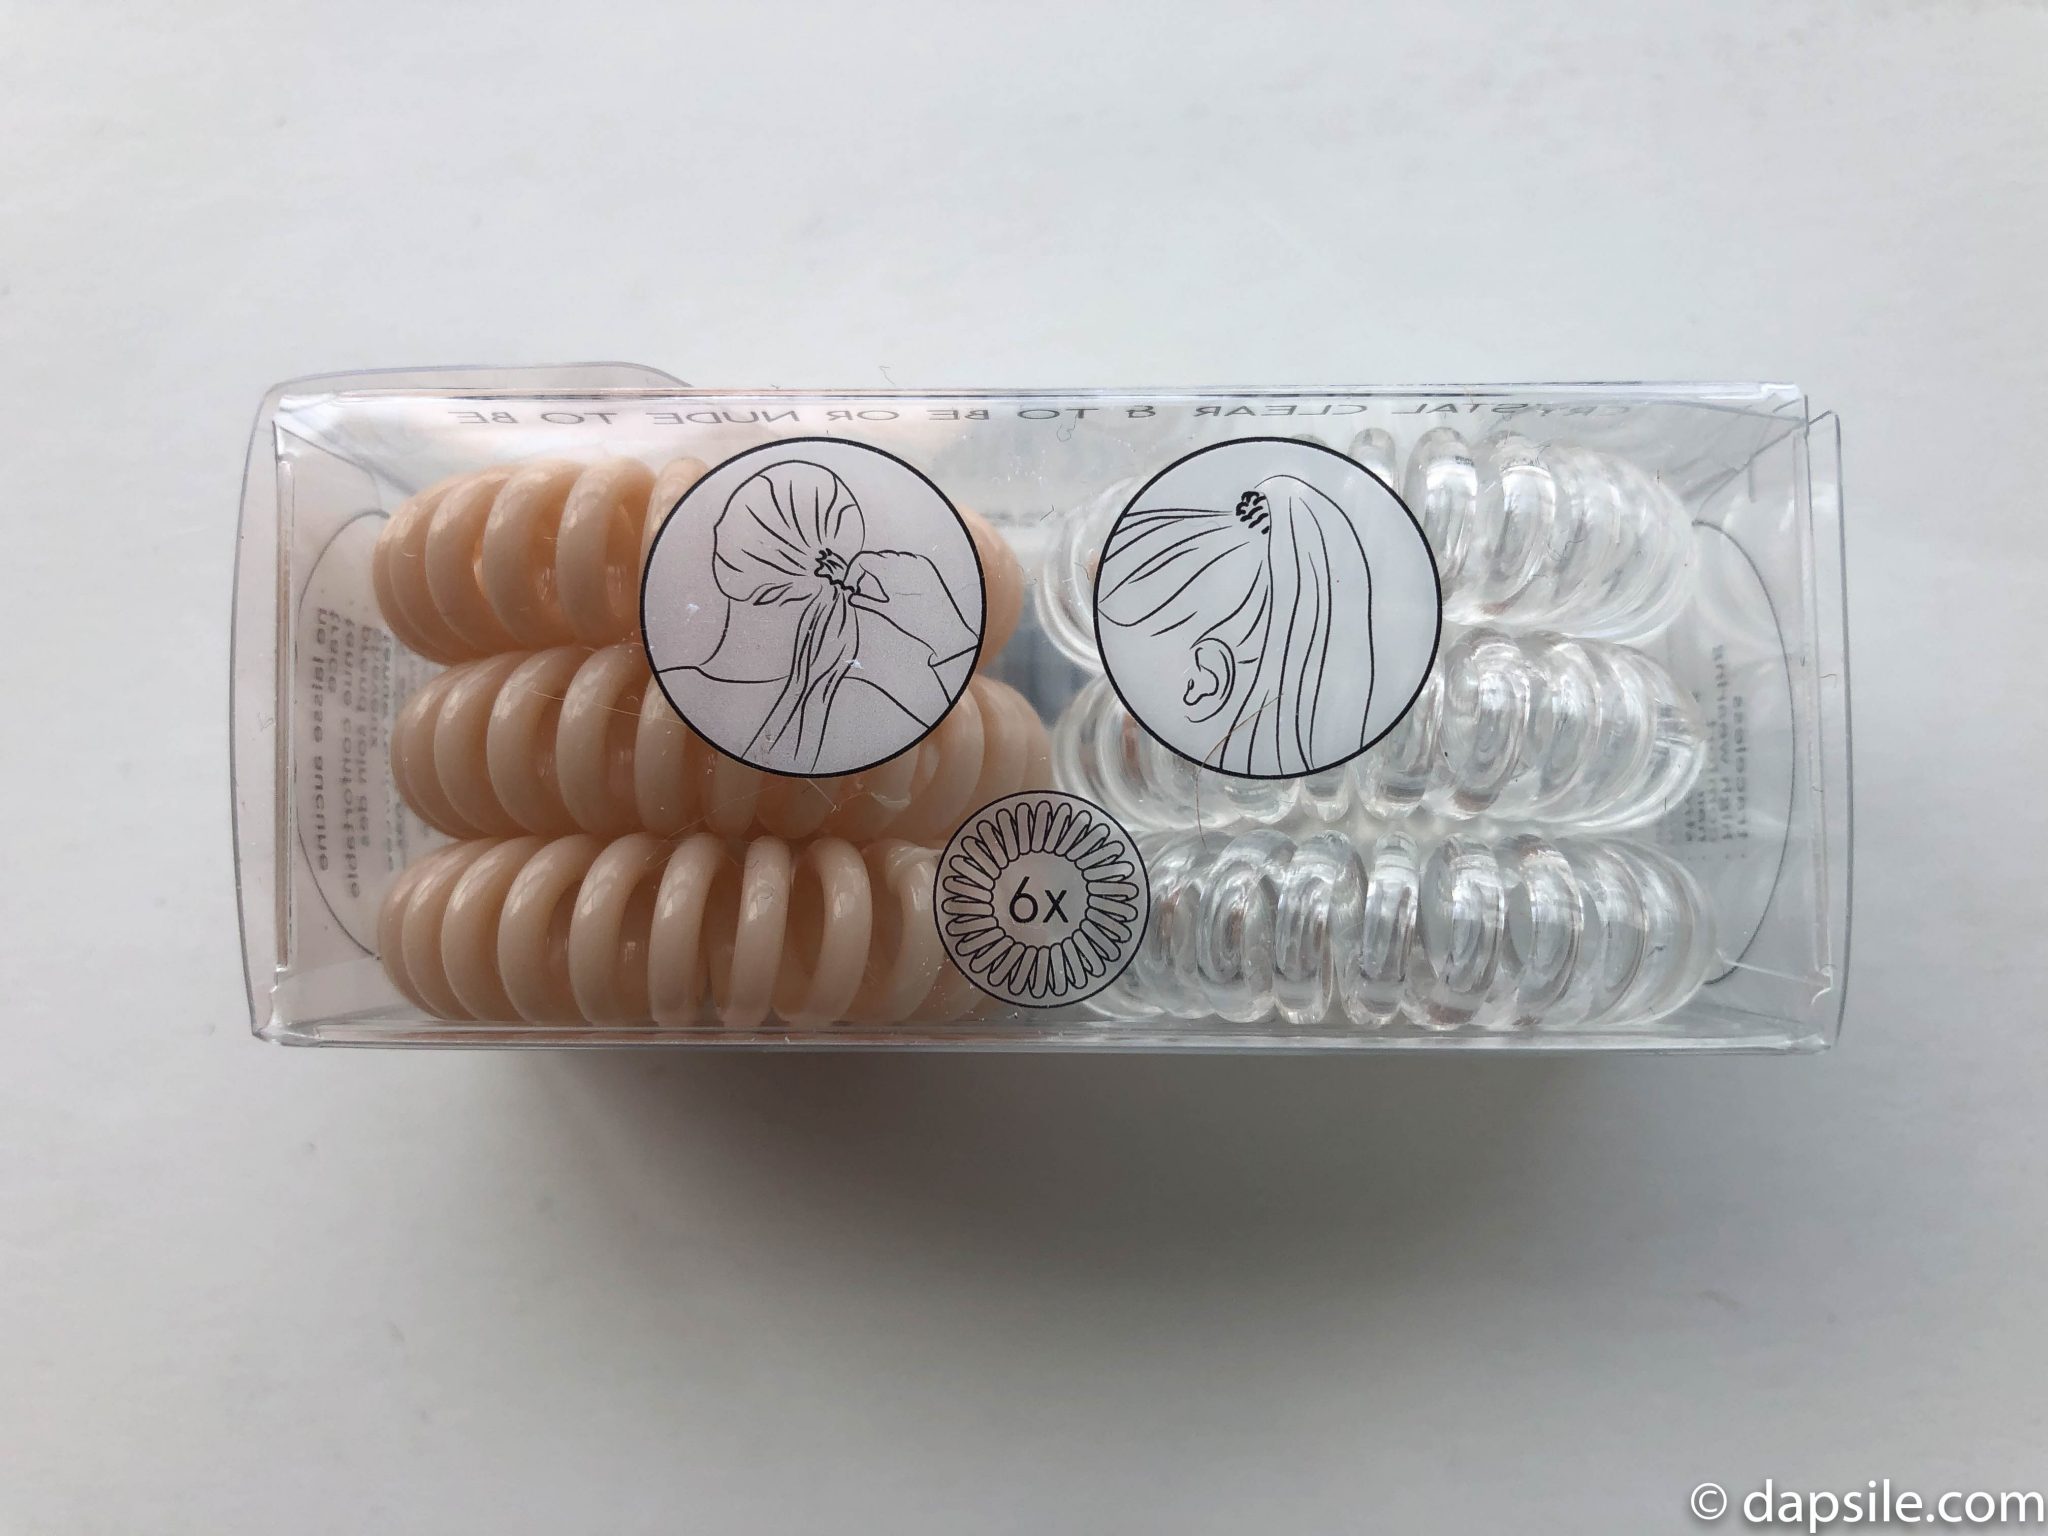 InvisiBobble Hair Rings with how to use pictures from the FabFitFun Summer 2019 subscription box